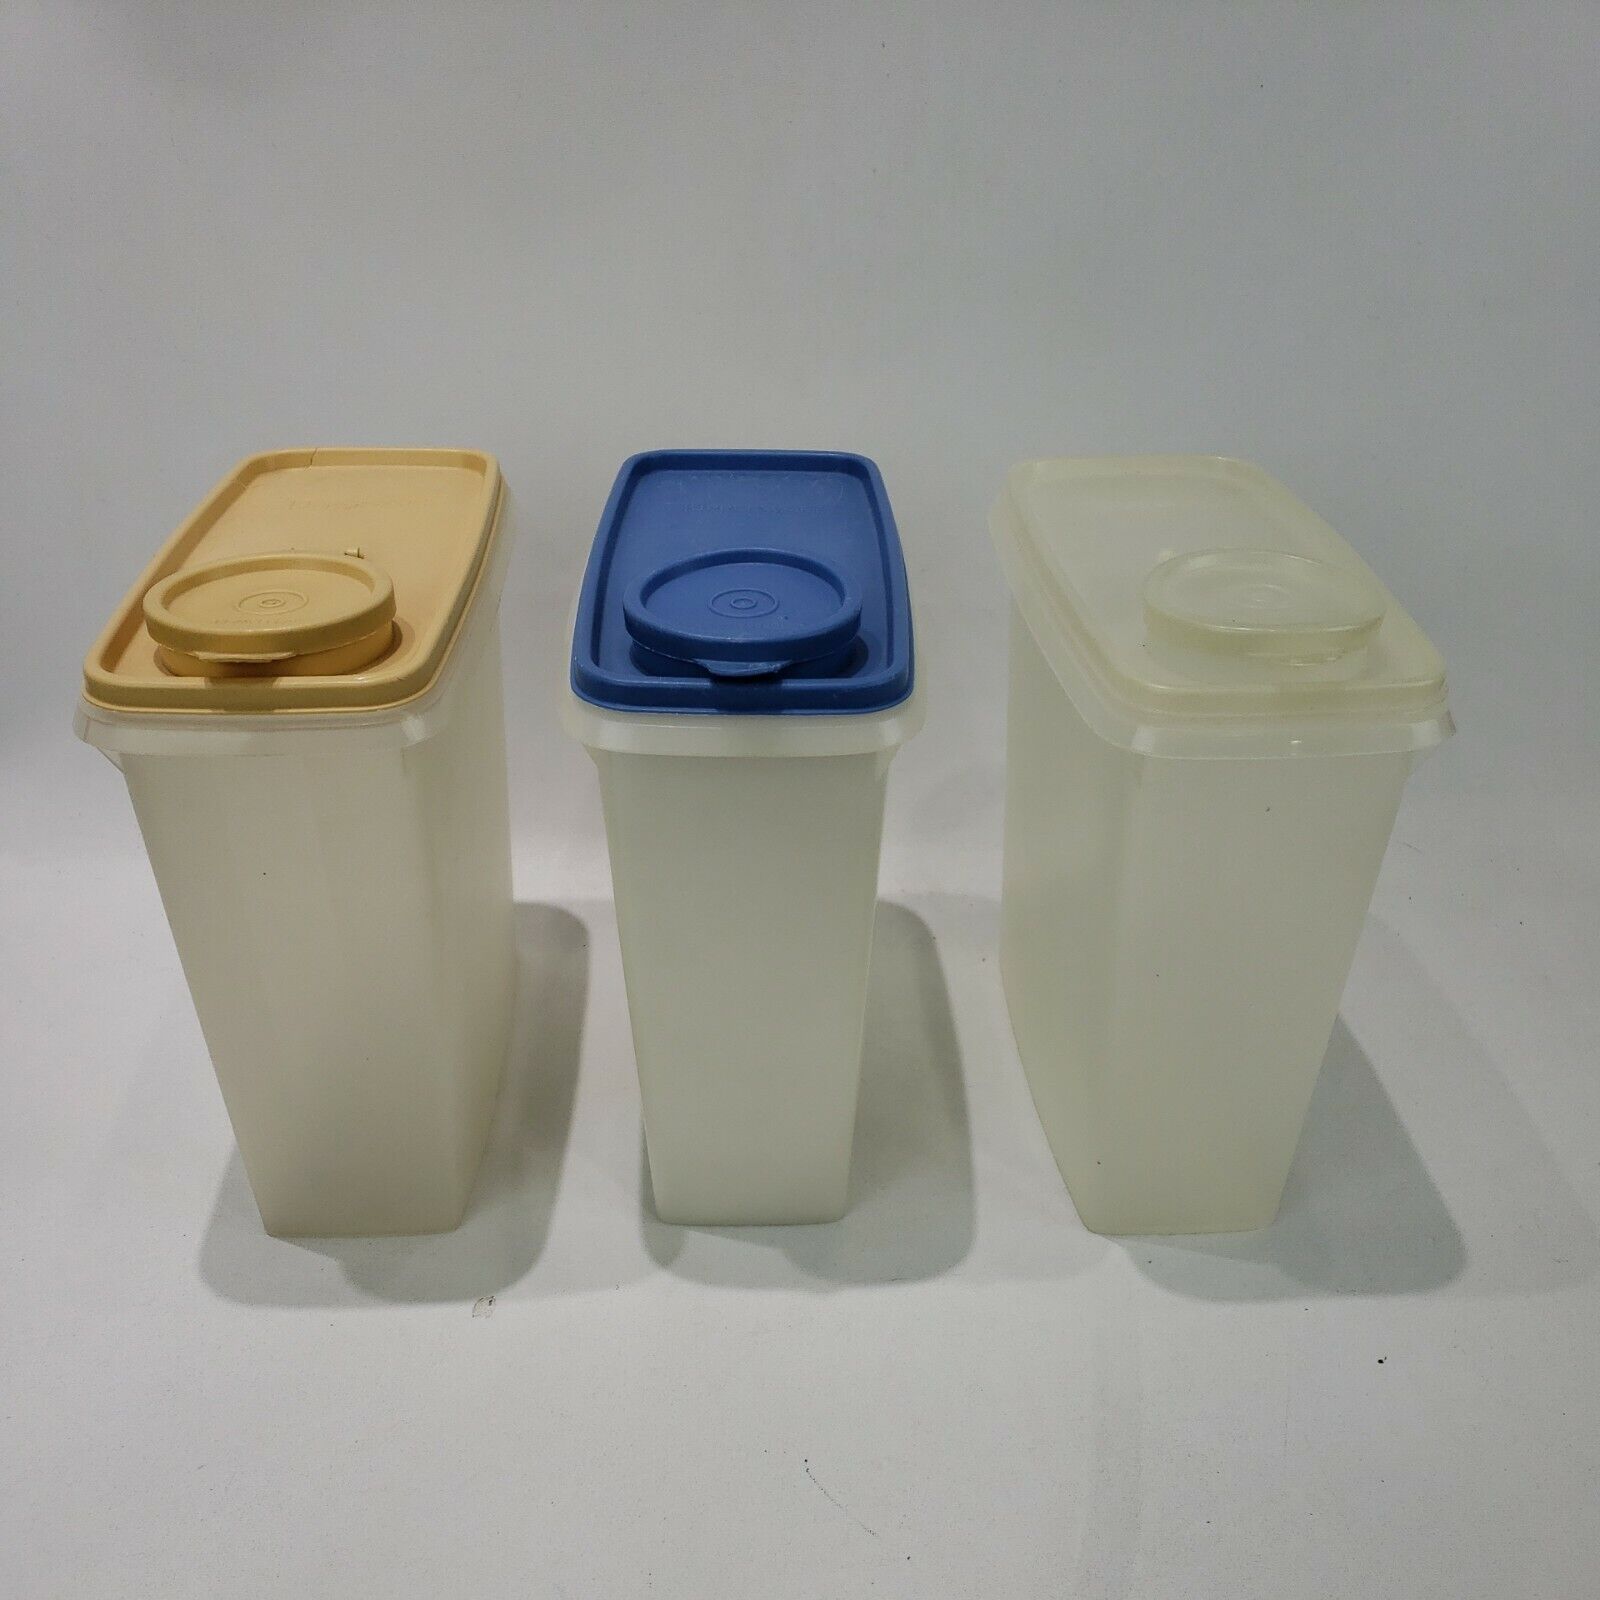 LOT OF 3 VINTAGE TUPPERWARE CEREAL CONTAINERS W/ LIDS 468-6, 469-5, 469-9